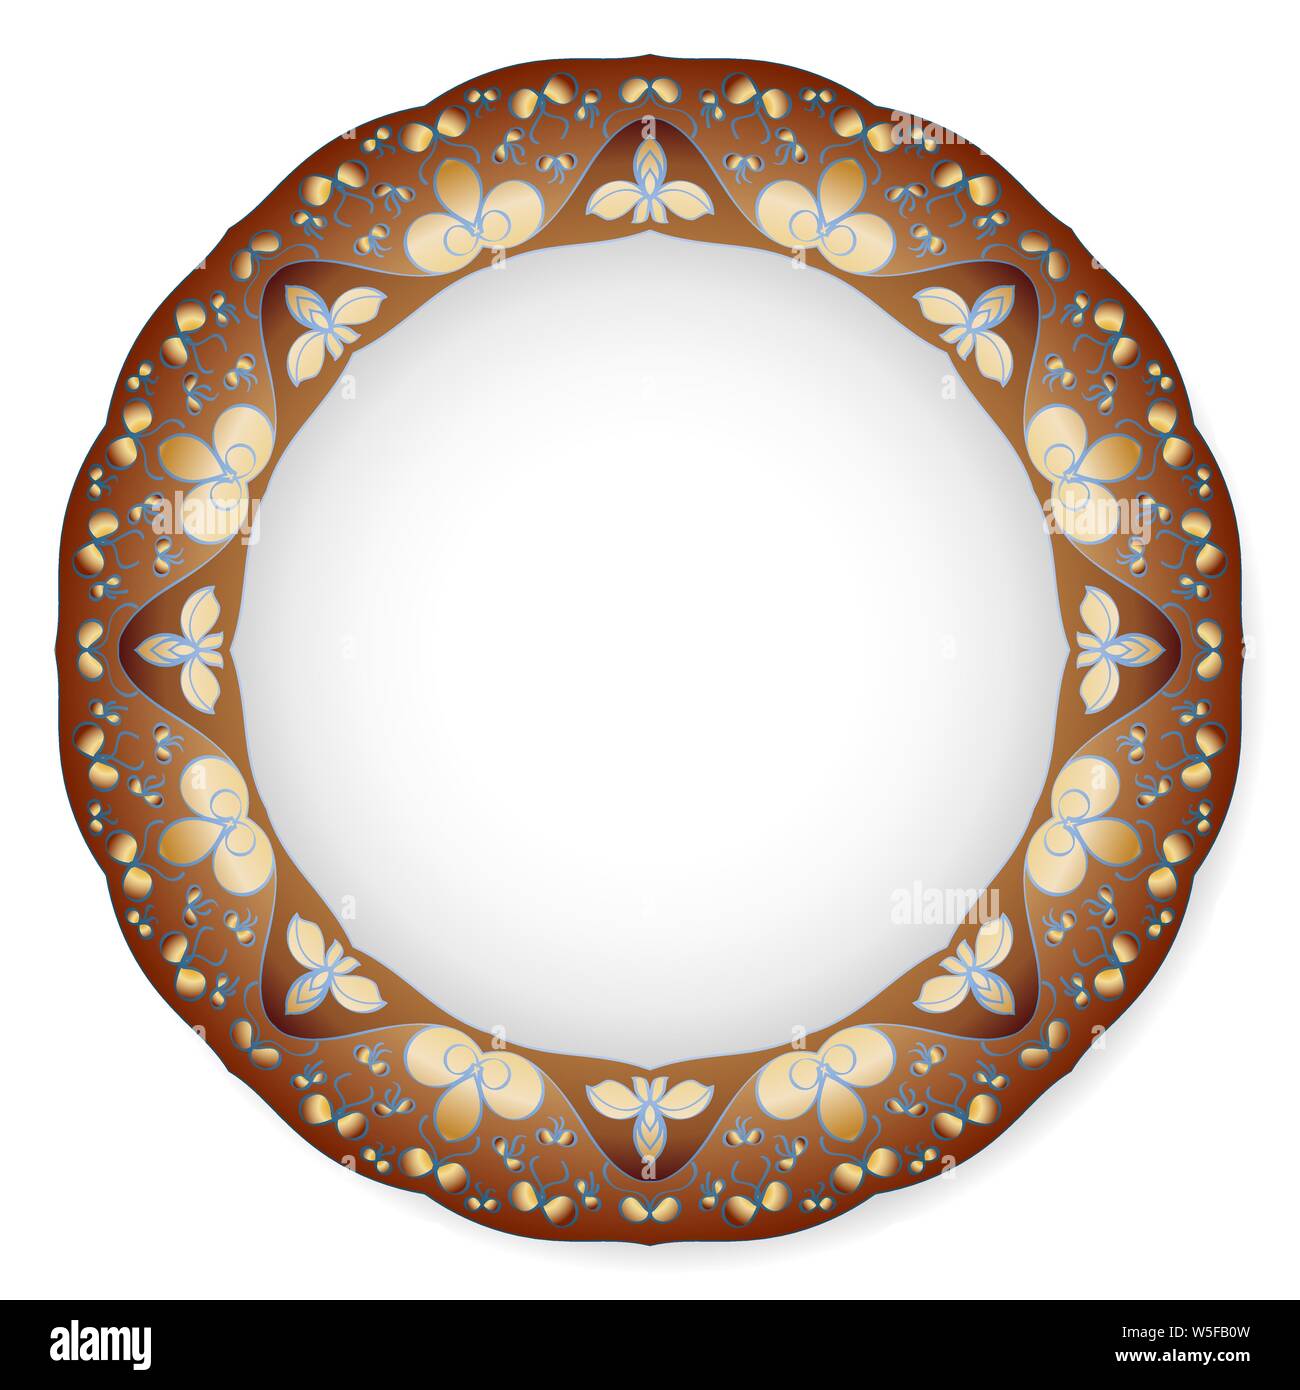 Plate with gold and blue circular ornament on brown backgraund. Stock Vector